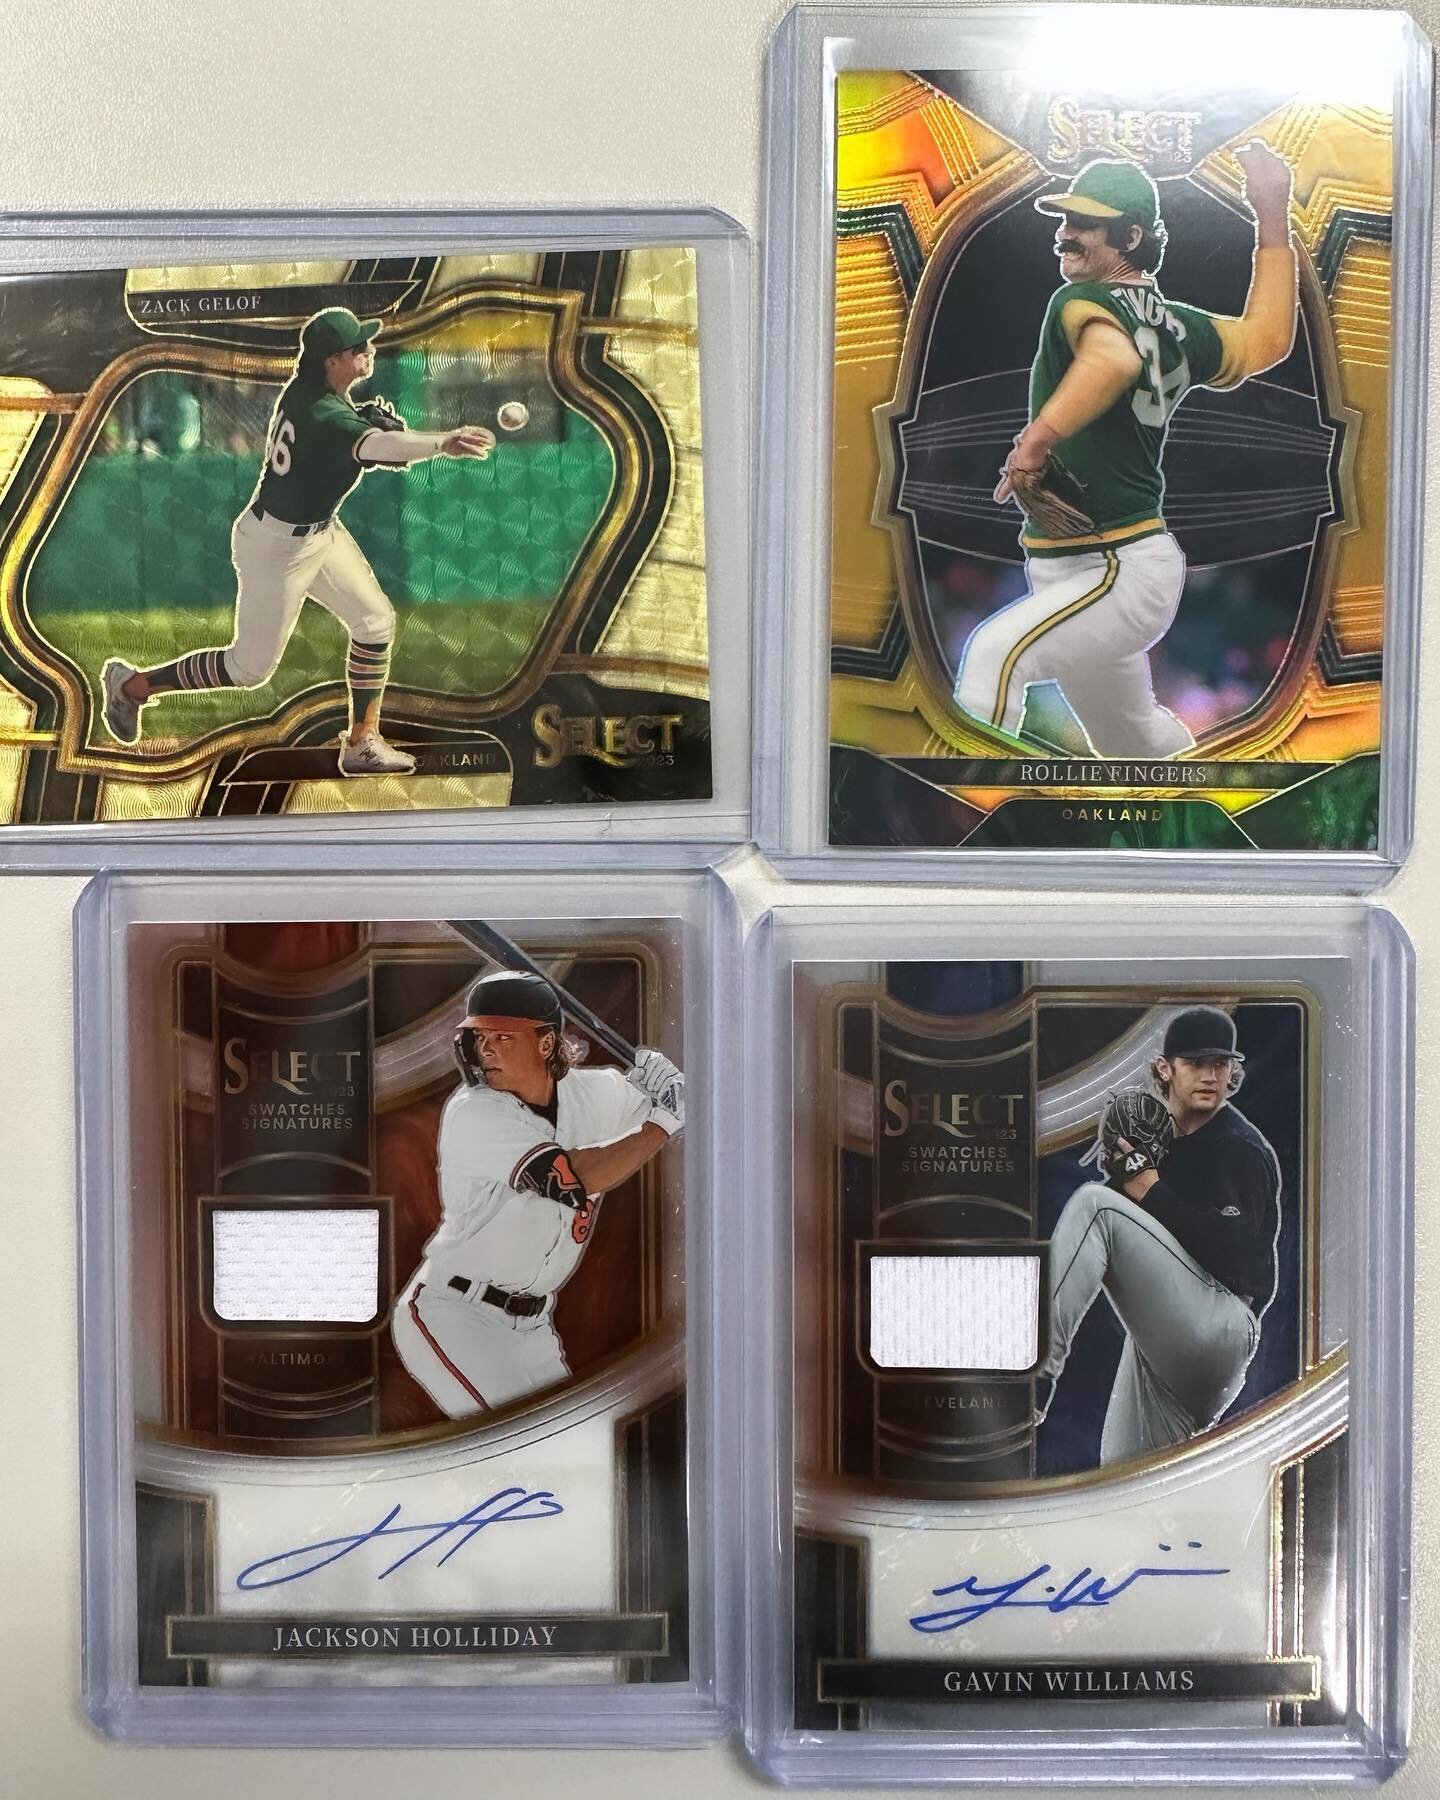 Insane box of Panini Select MLB for our buddy @shif_cards !! Gelof 1/1 and a Holliday auto among others. Congrats Jacob!